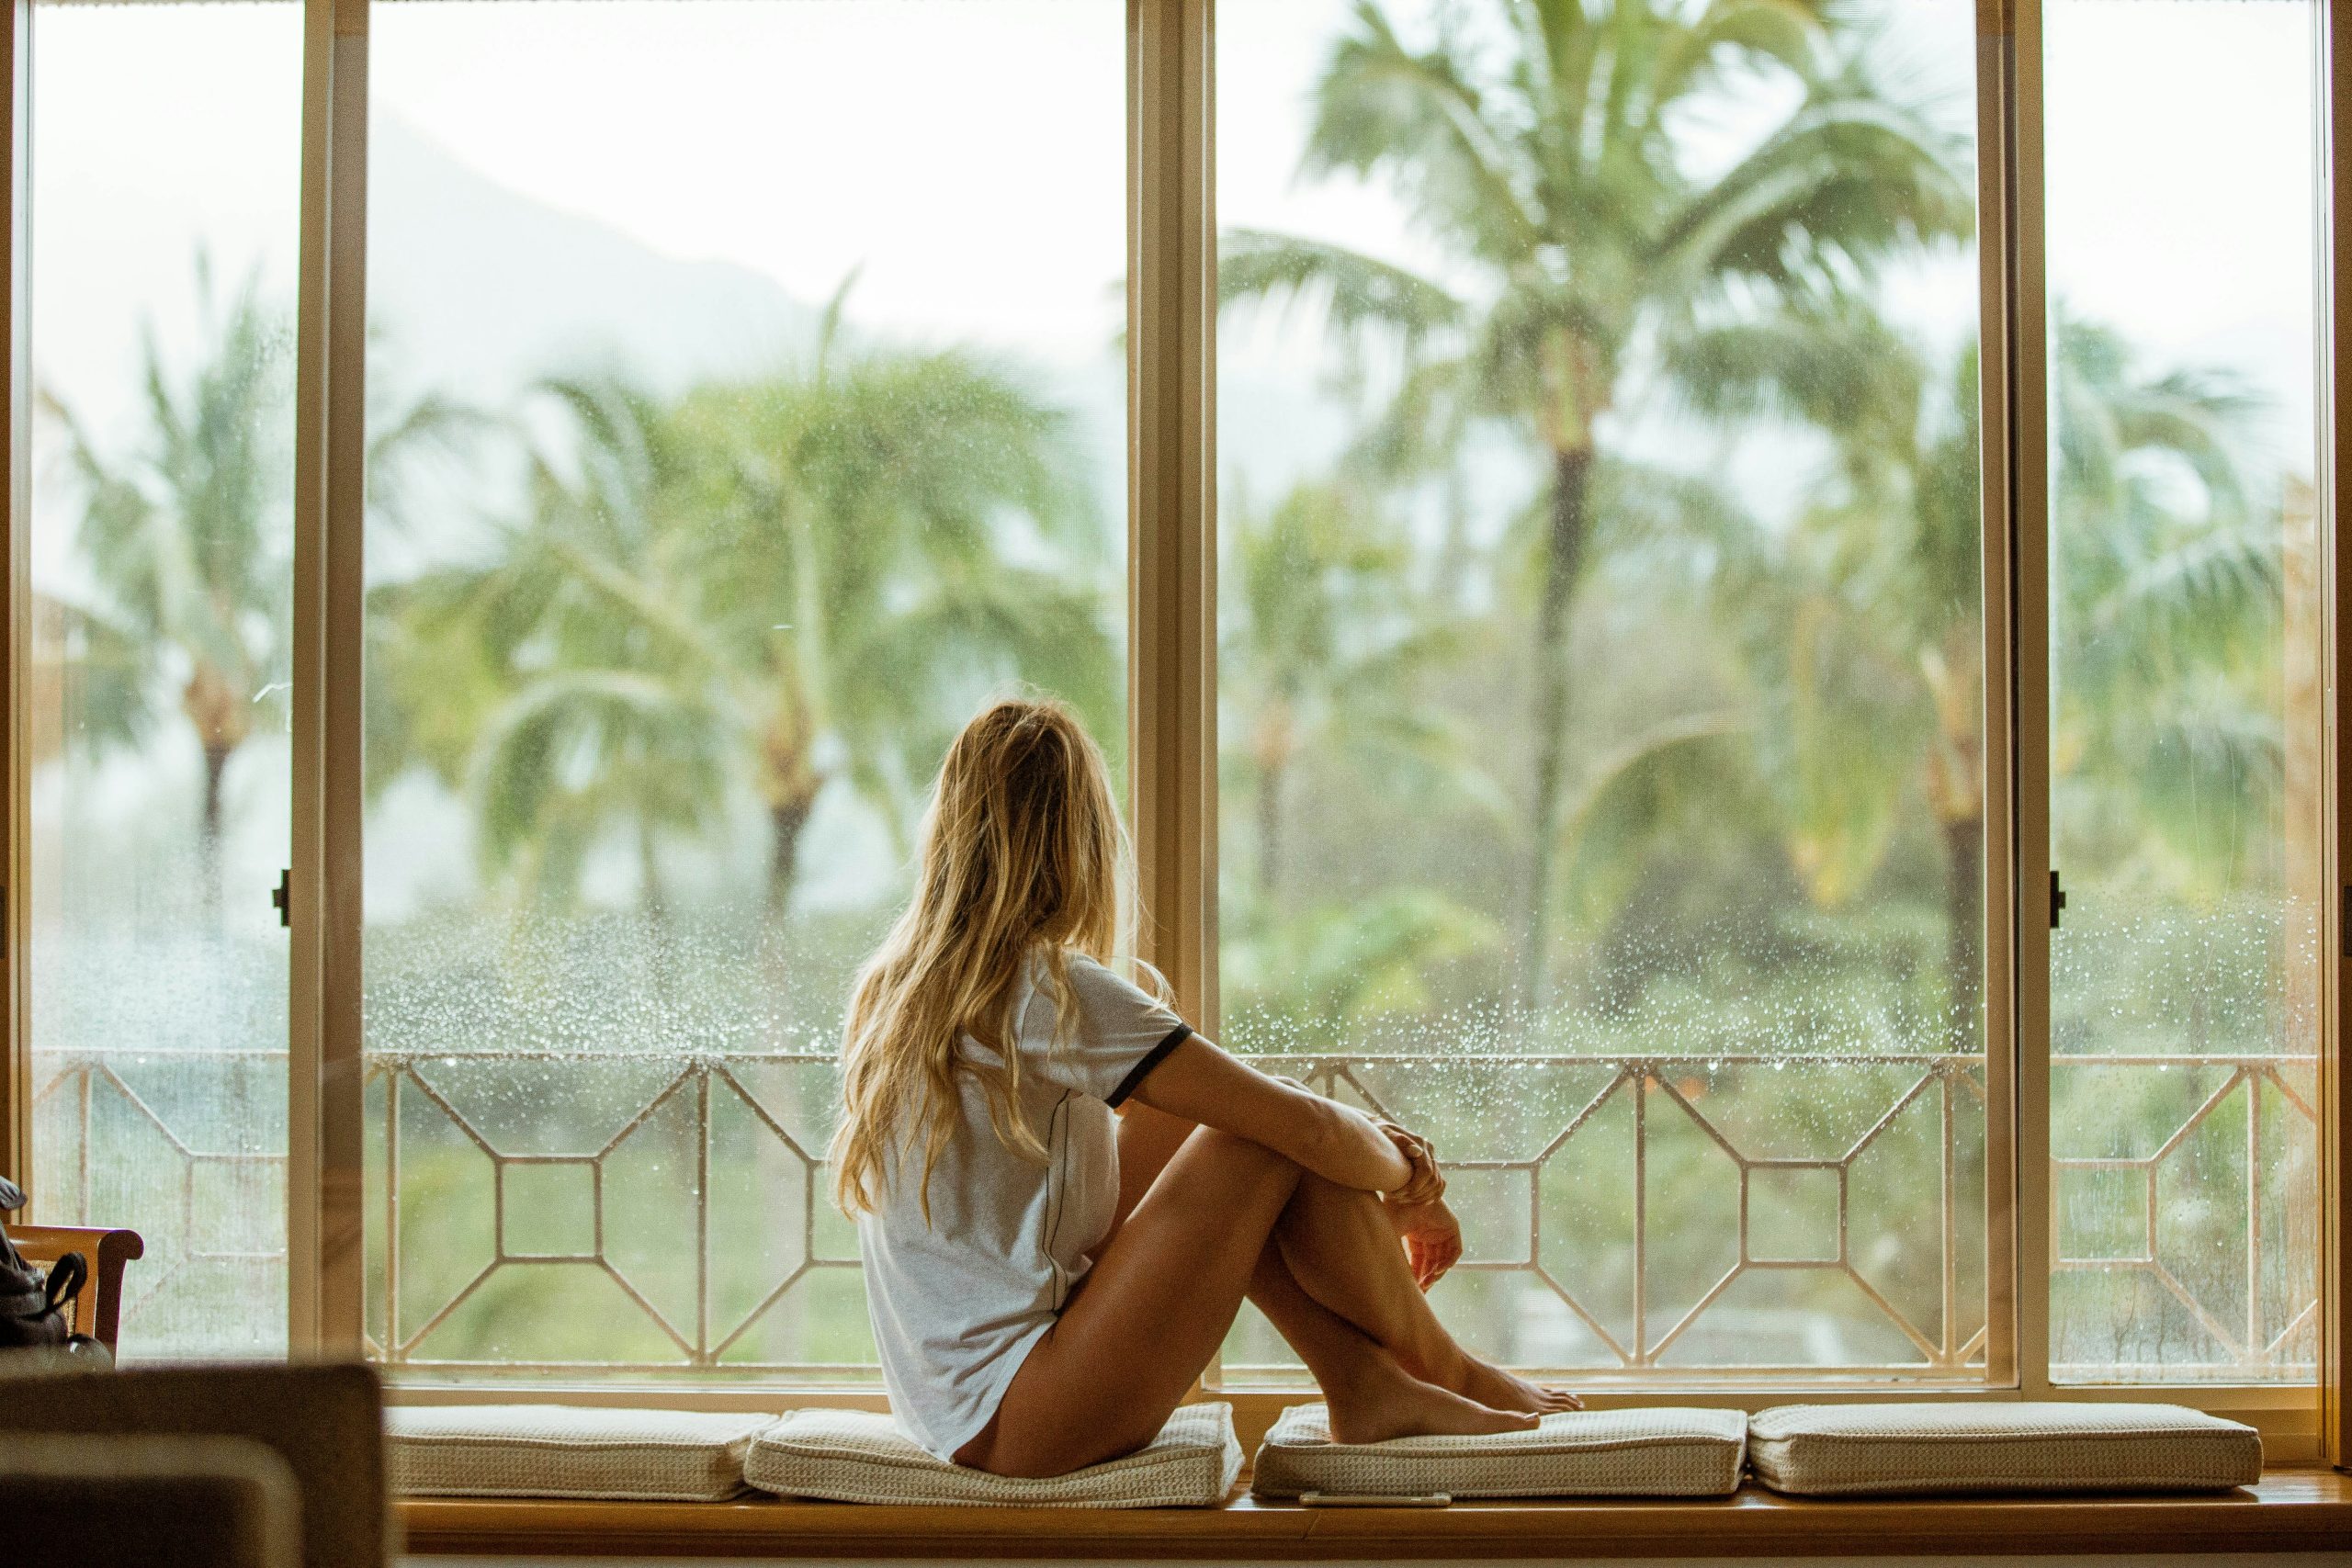 discover ultimate relaxation and rejuvenation at luxurious spa resorts. indulge in pampering treatments, serene surroundings, and tranquil experiences for a truly blissful escape.